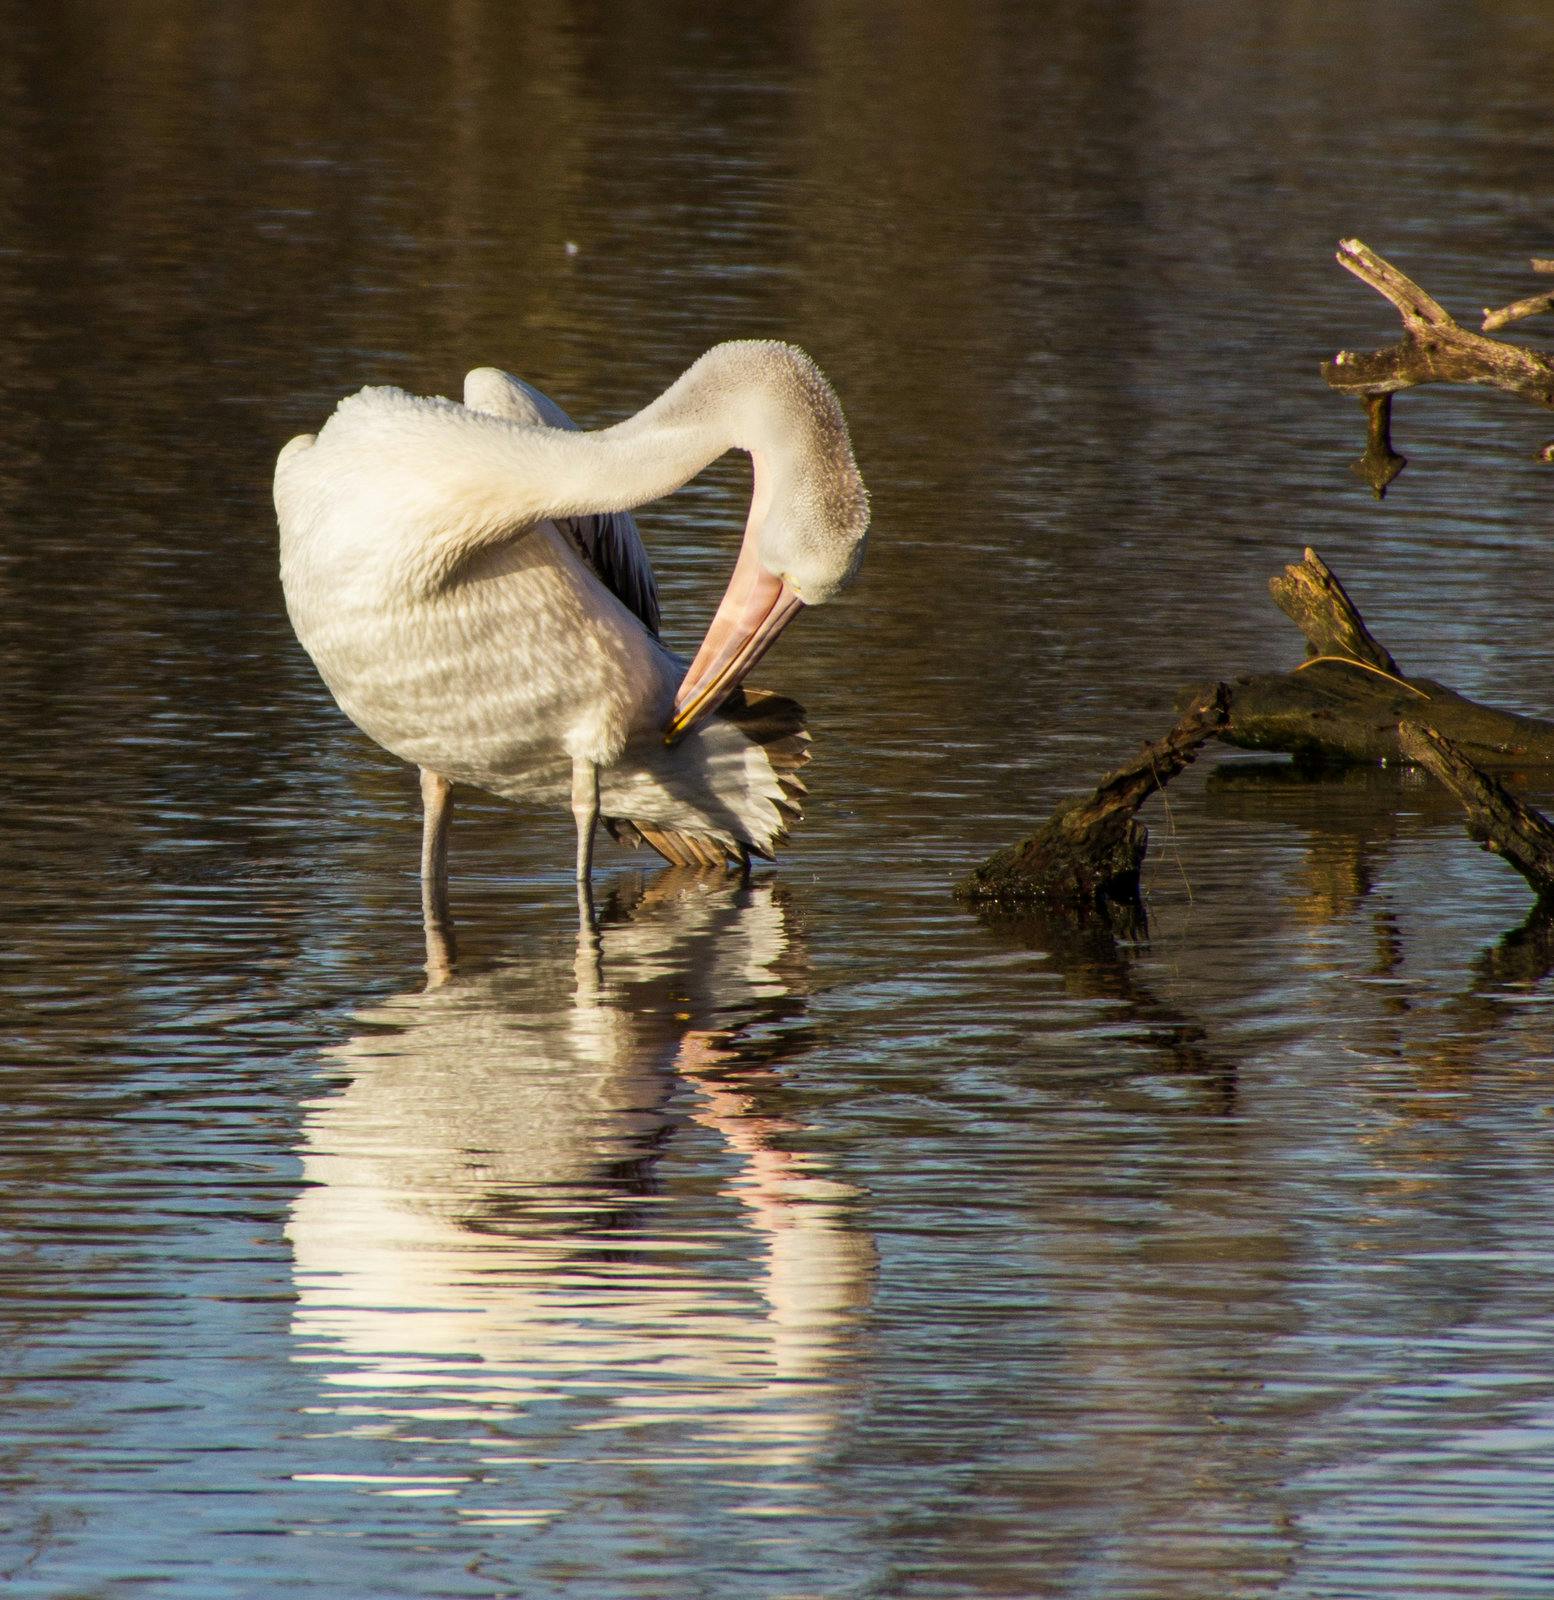 Preening Pelican, submitted by Pastor Mike Fulwood